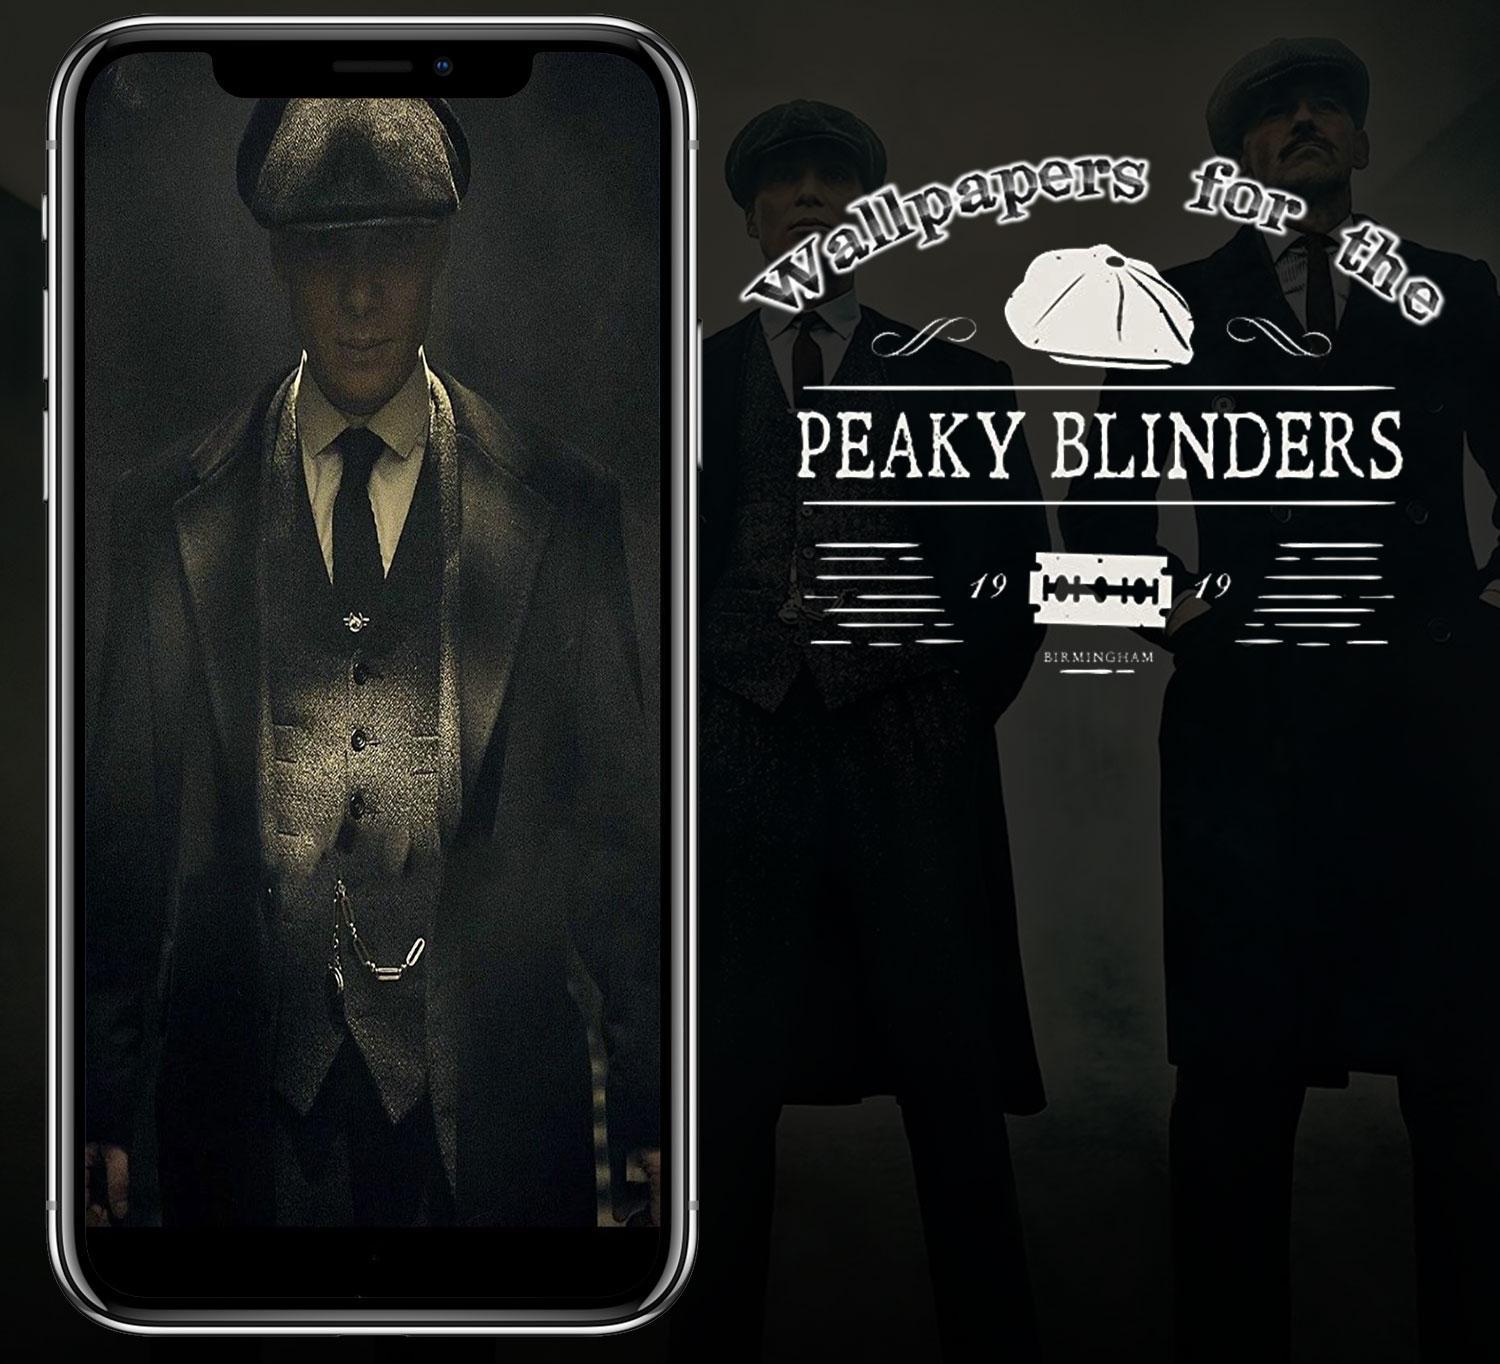 Wallpapers 4 Peaky Blinders for Android   APK Download 1500x1364